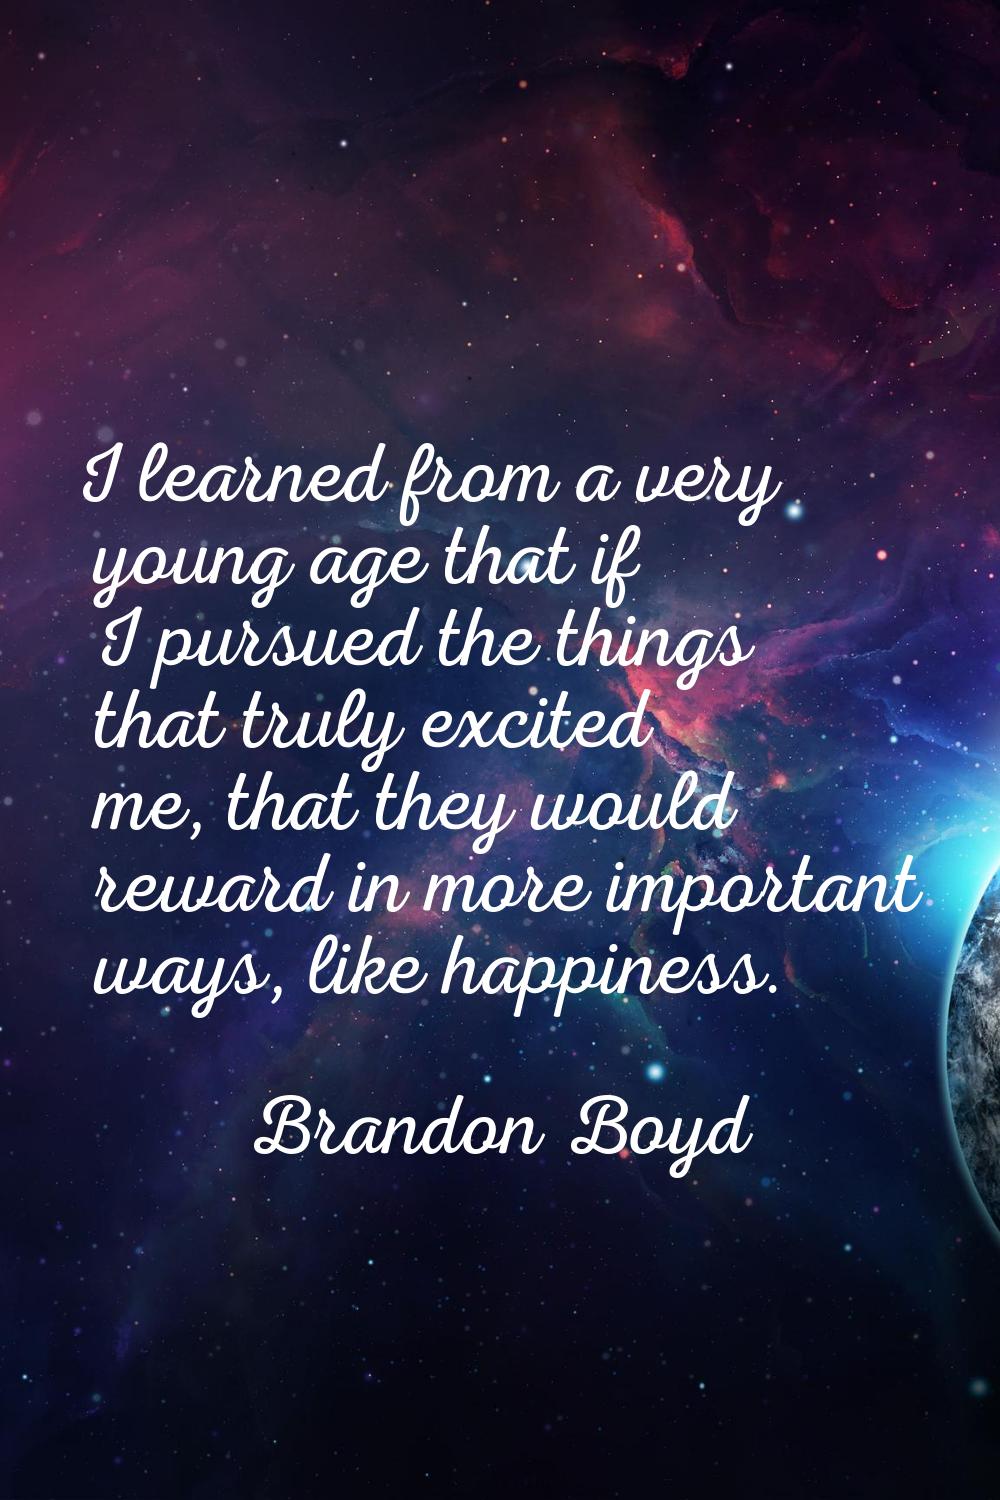 I learned from a very young age that if I pursued the things that truly excited me, that they would